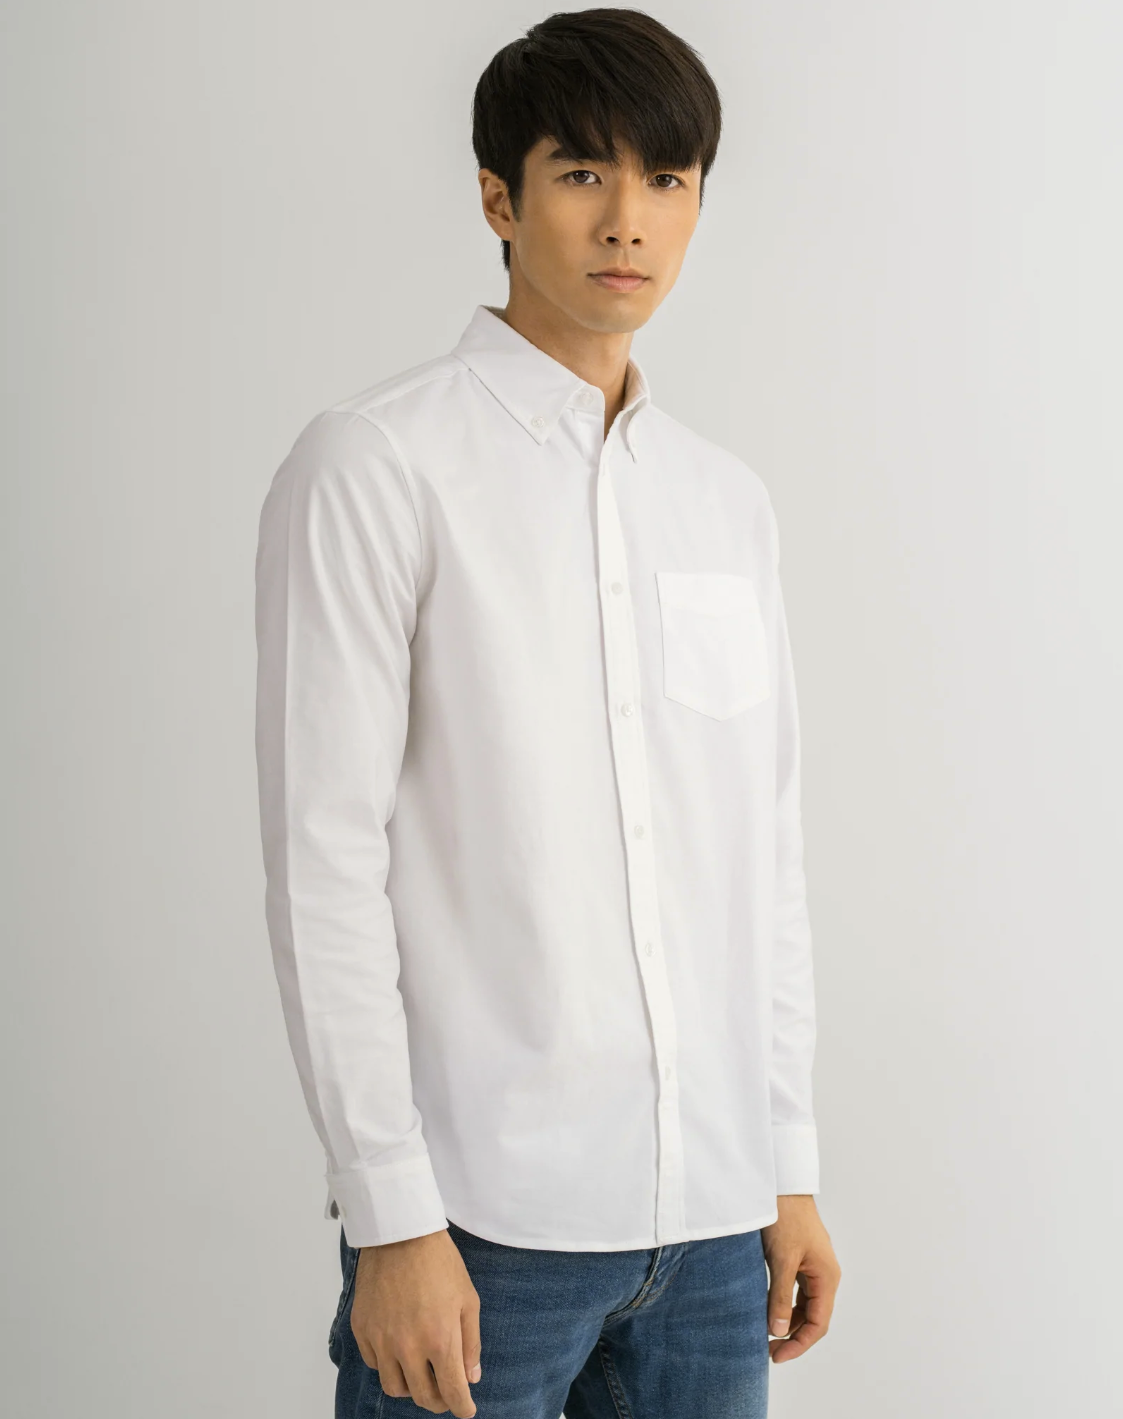 Source The Oxford Shirt